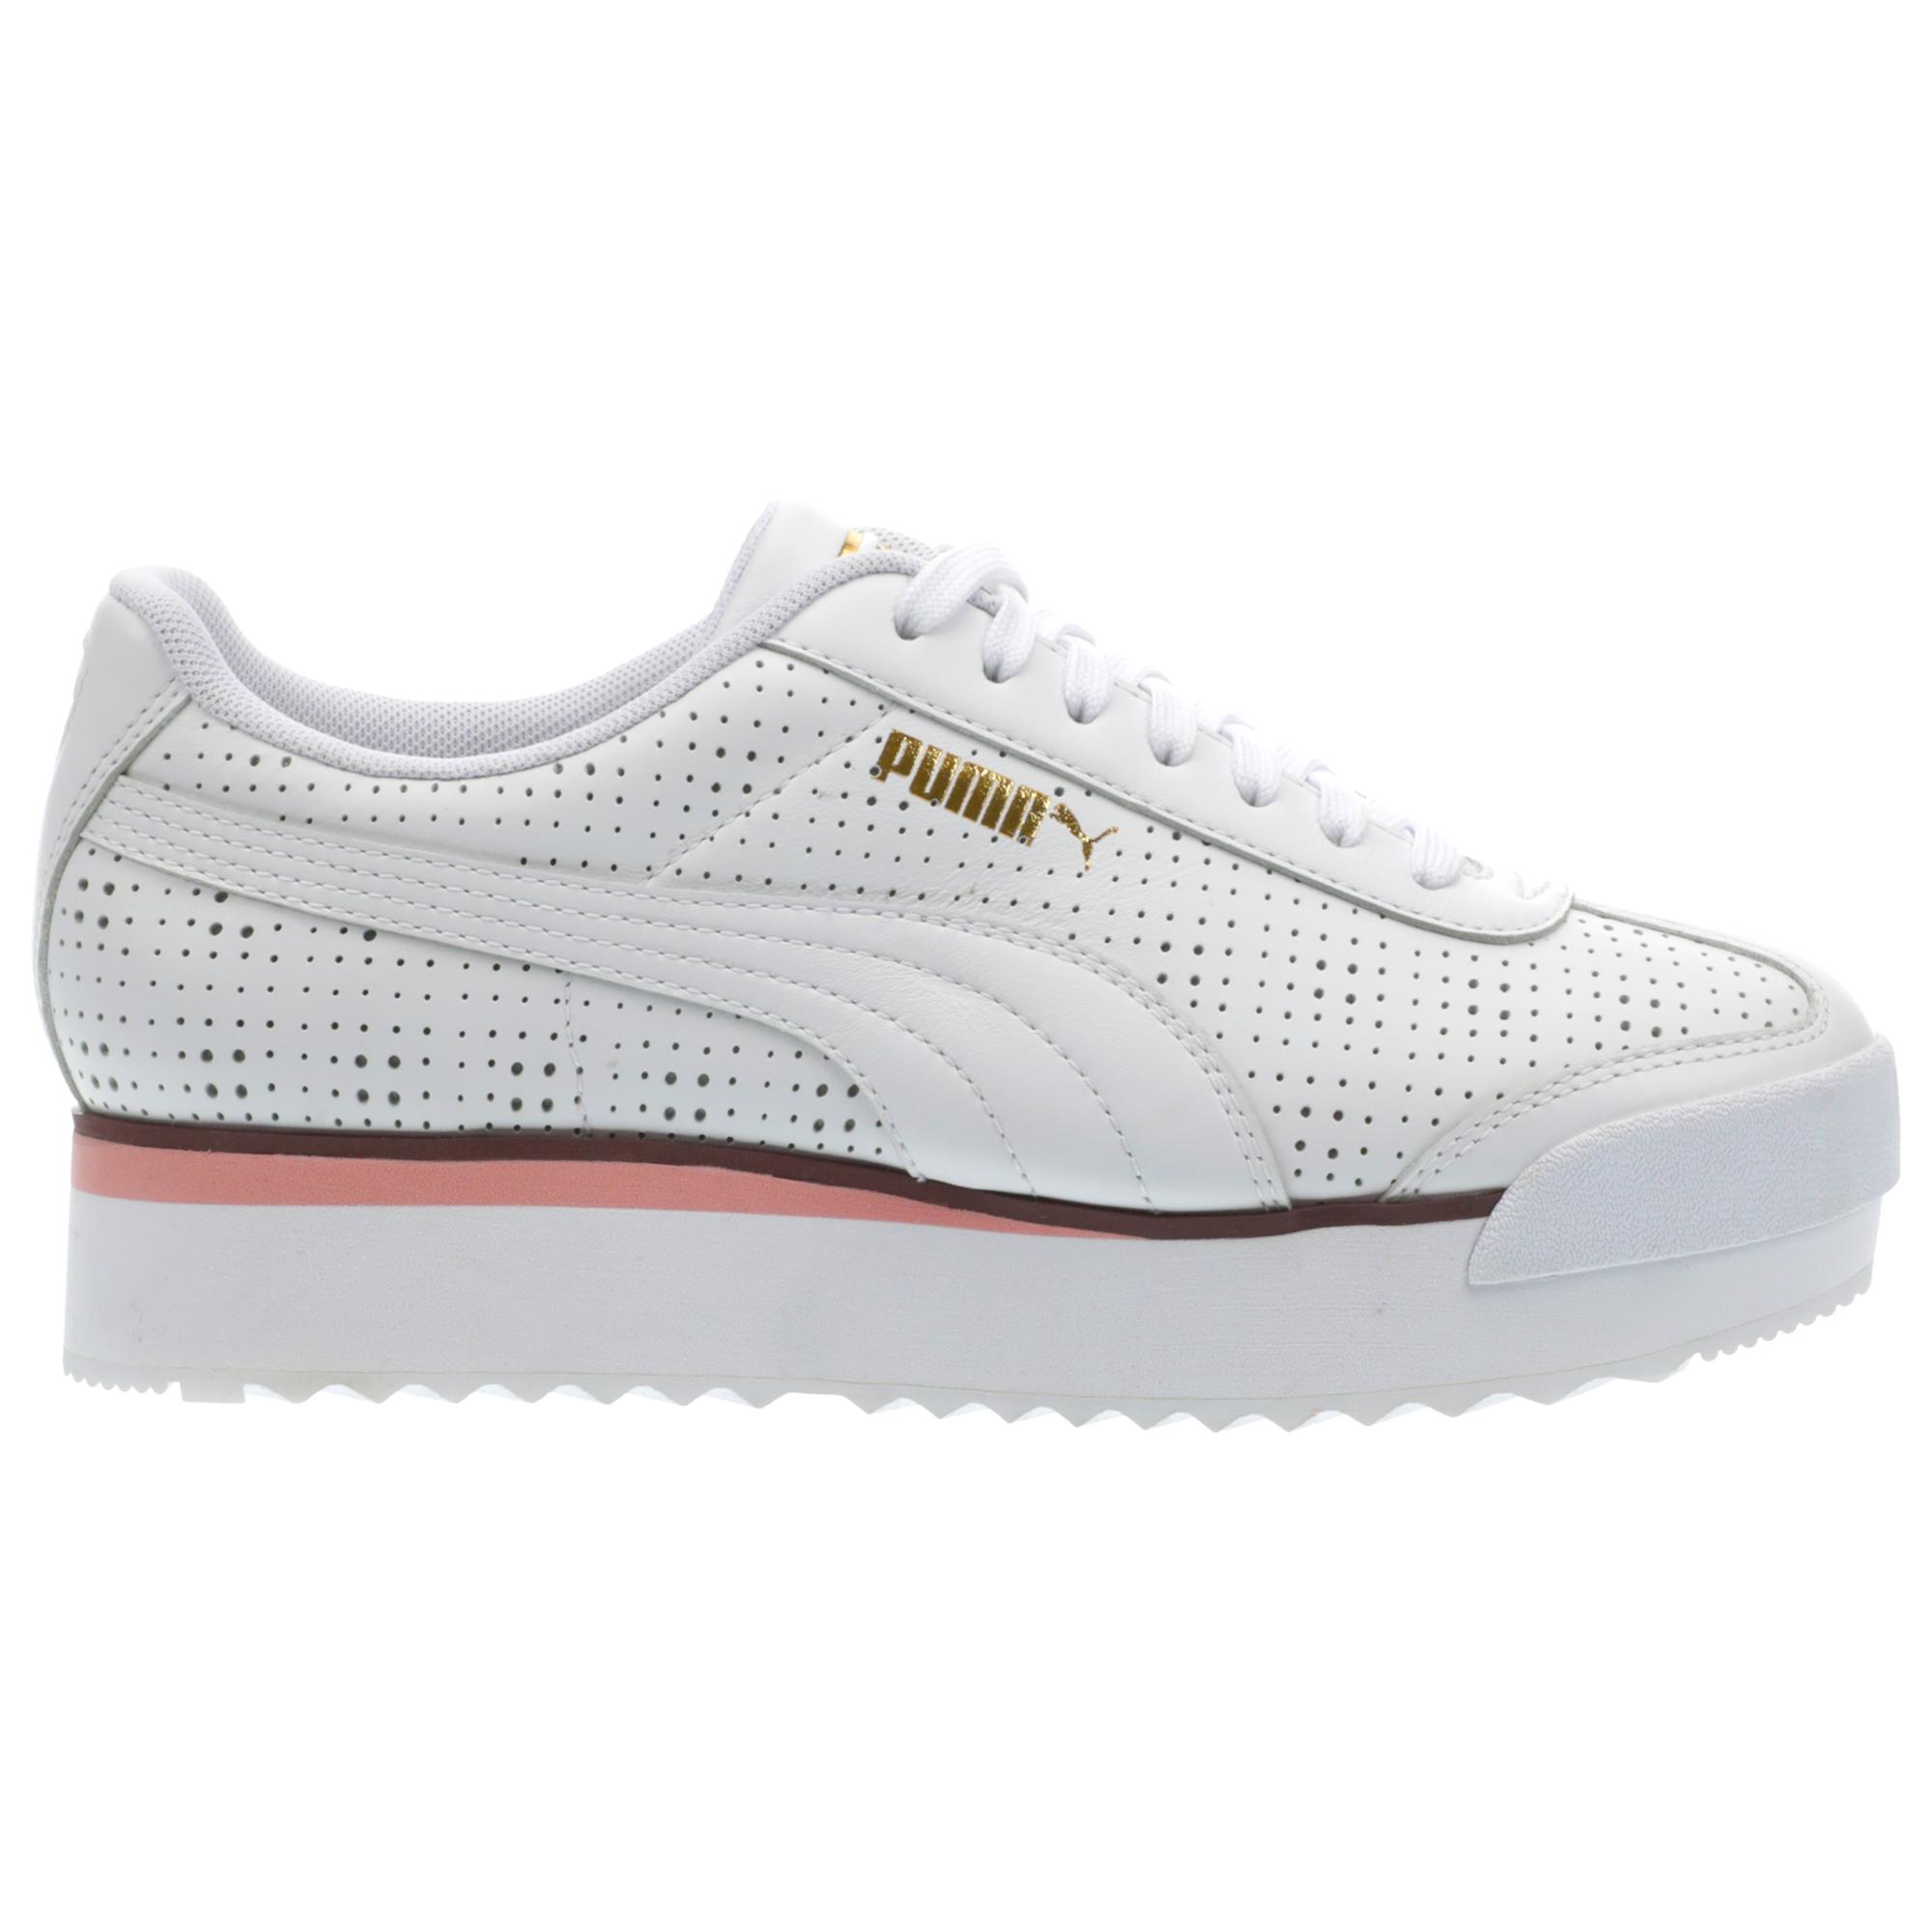 PUMA Lace Roma Amor Perf Women's Sneakers in White/Pink (White) - Save ...